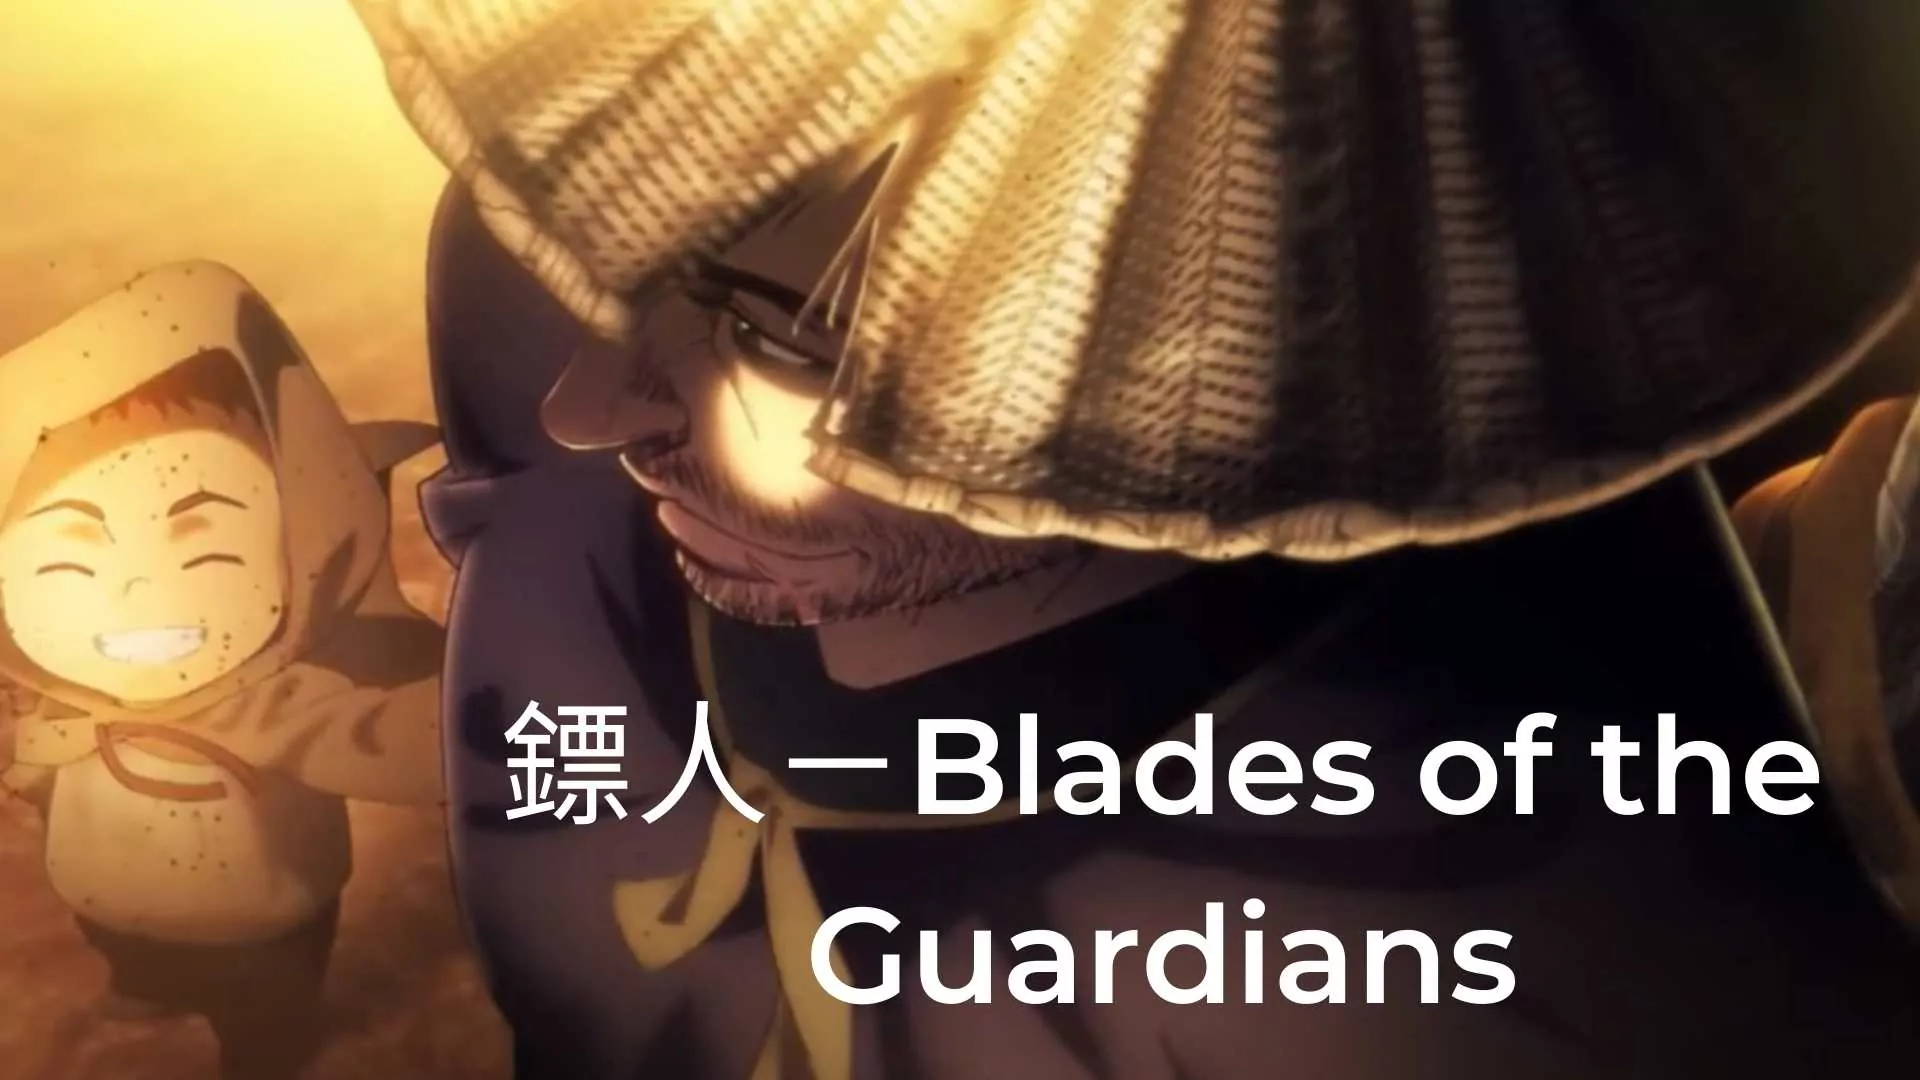 Blades of the Guardians release date, trailer, overview. Upcoming Anime Blades of the Guardians everything to know about.